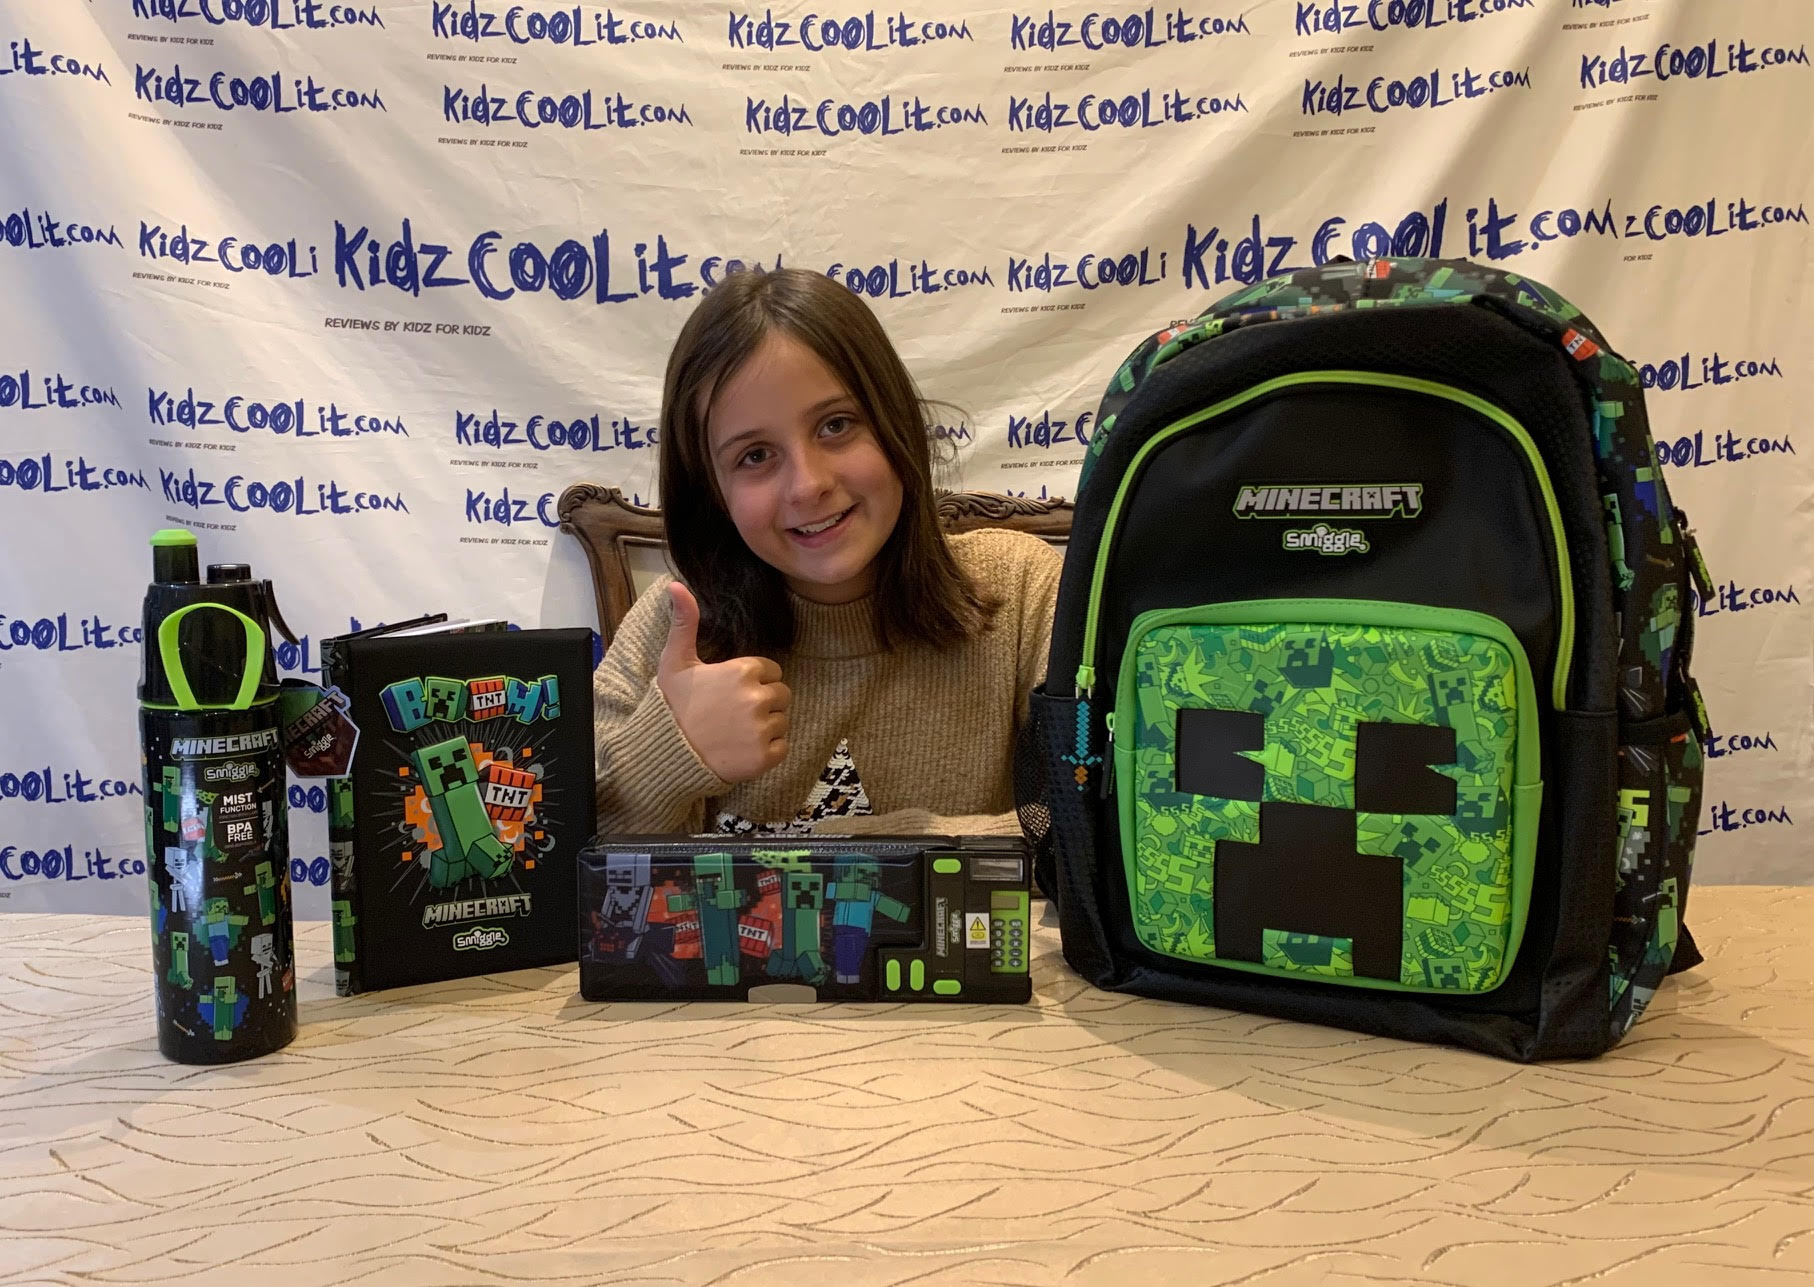 MINECRAFT FAST BECOMING A SMIGGLE RETAIL SUCCESS FOR MERCHANTWISE